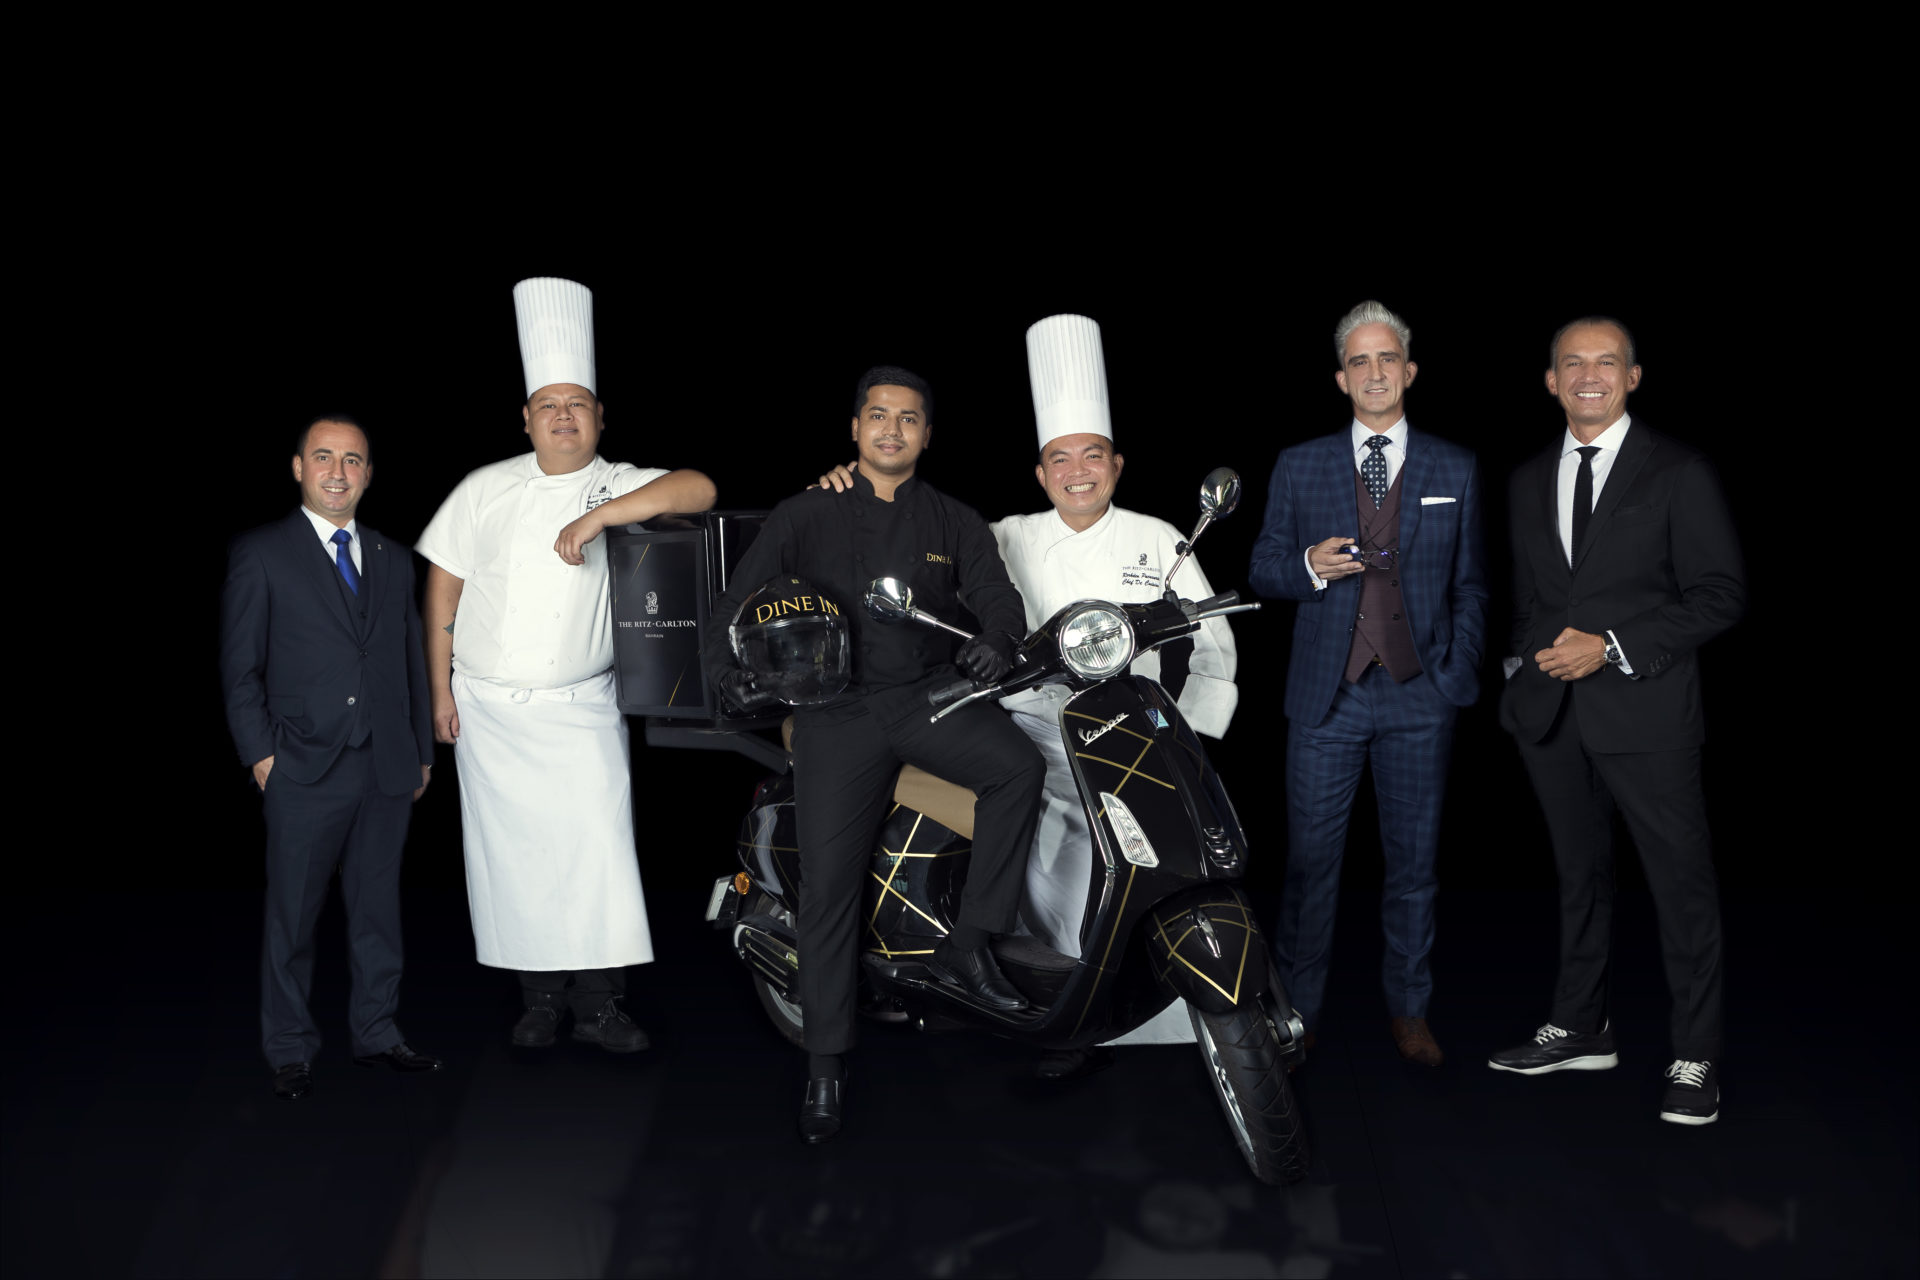 THE RITZ-CARLTON, BAHRAIN PARTNERS WITH DINE IN DELIVERY SERVICE FOR AN EXCEPTIONAL CULINARY EXPERIENCE AT HOME